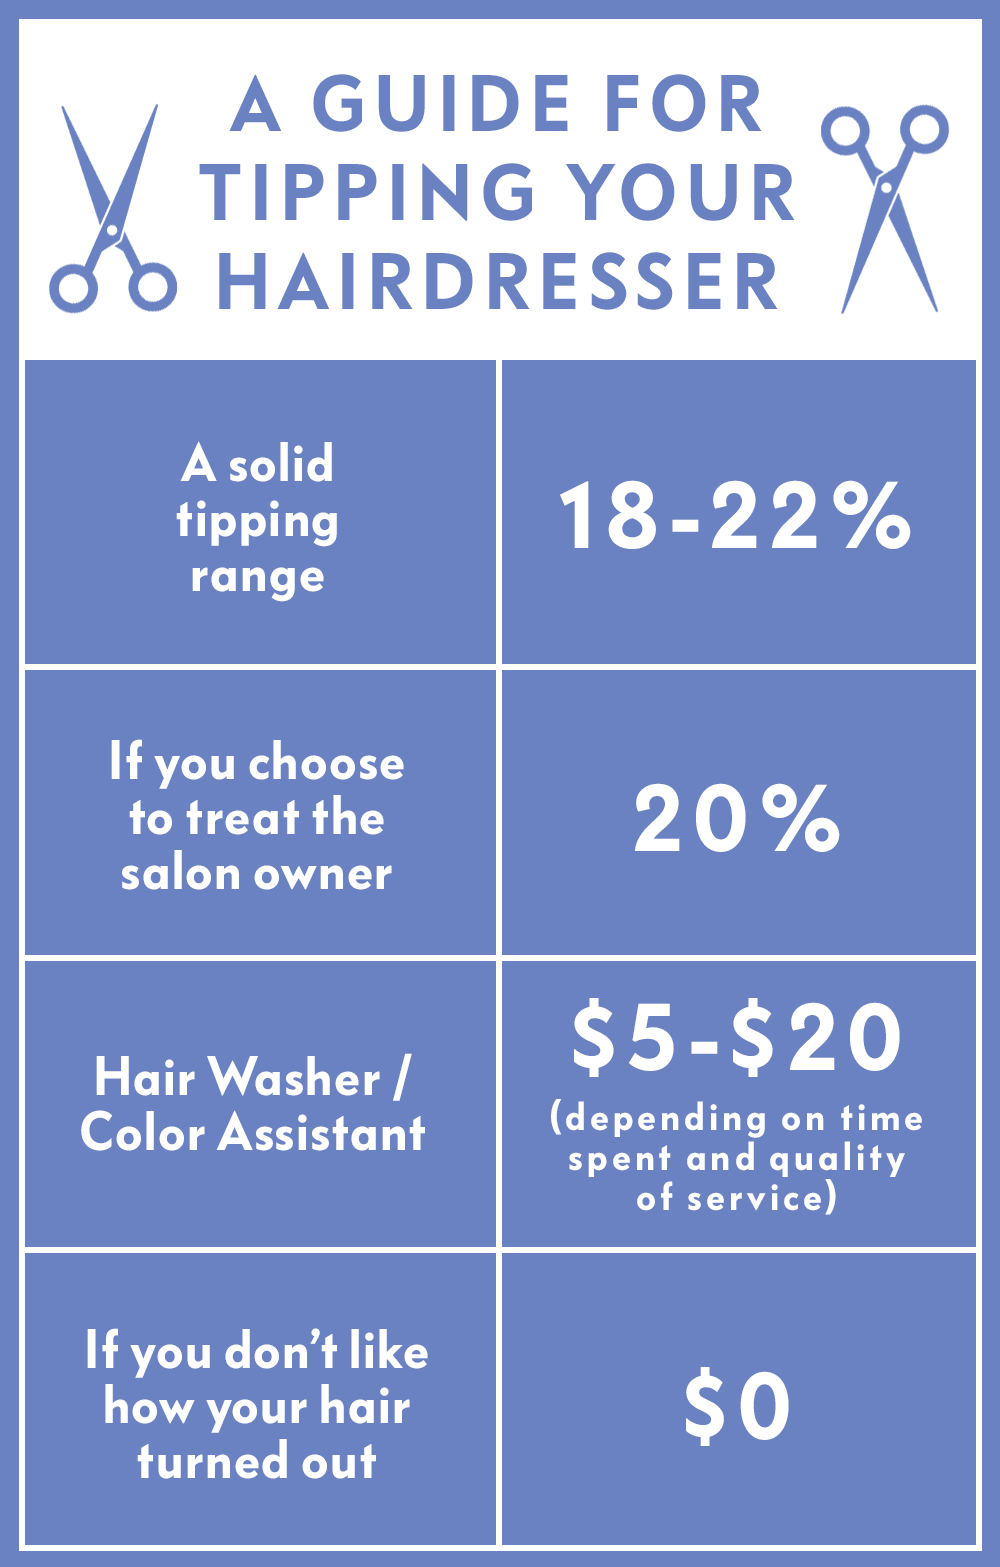 How Much to Tip Your Hairdresser - How Much to Tip Stylist